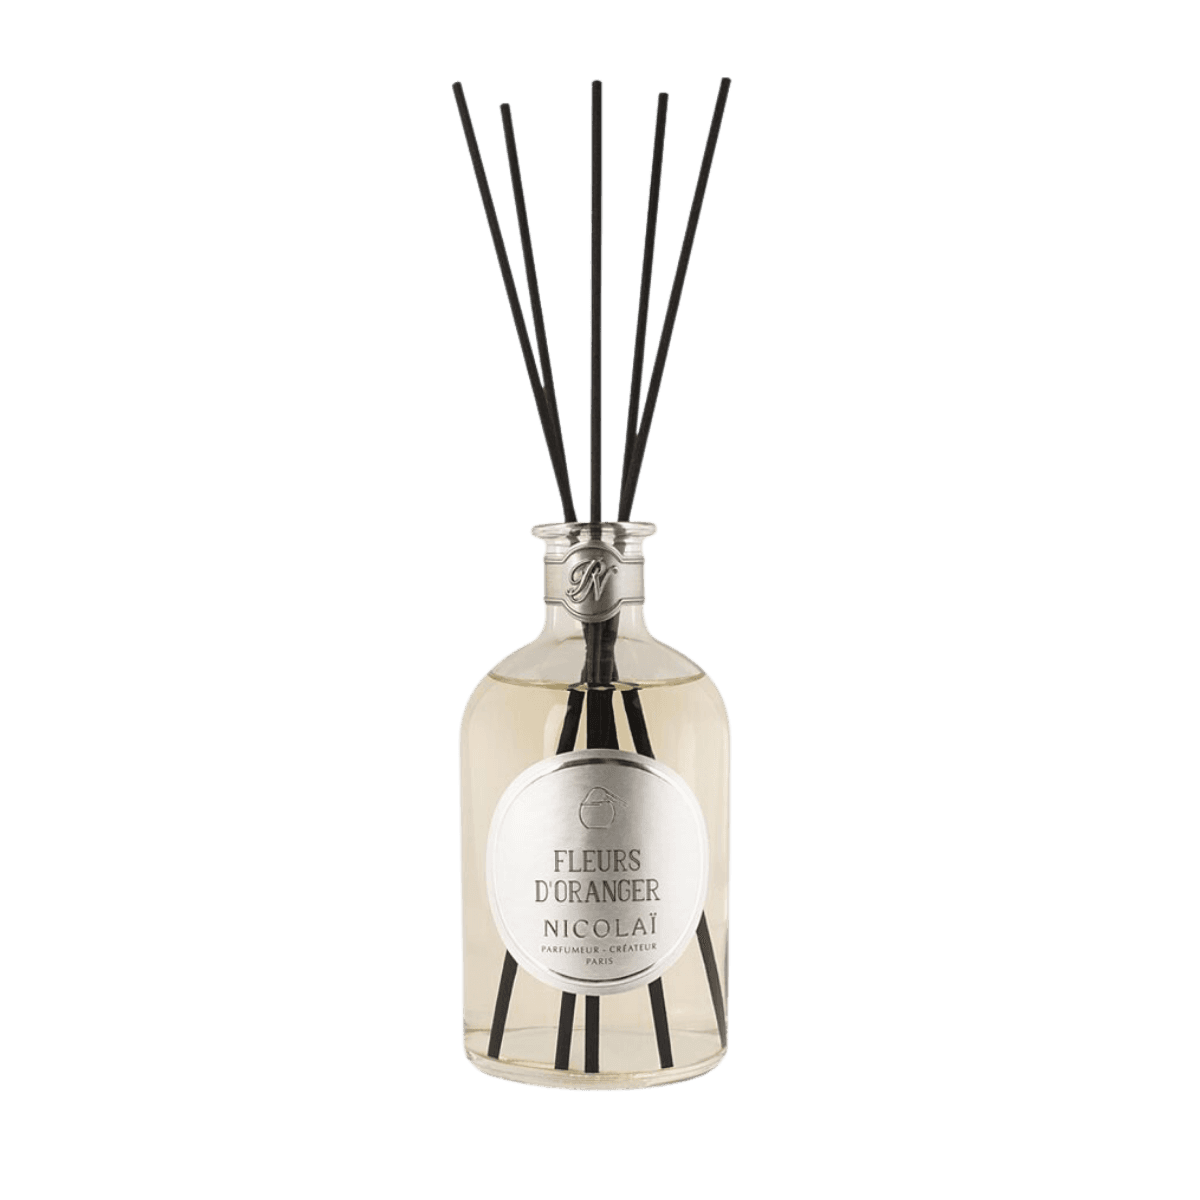 Image of Fleurs d'Oranger reed diffuser by Nicolai